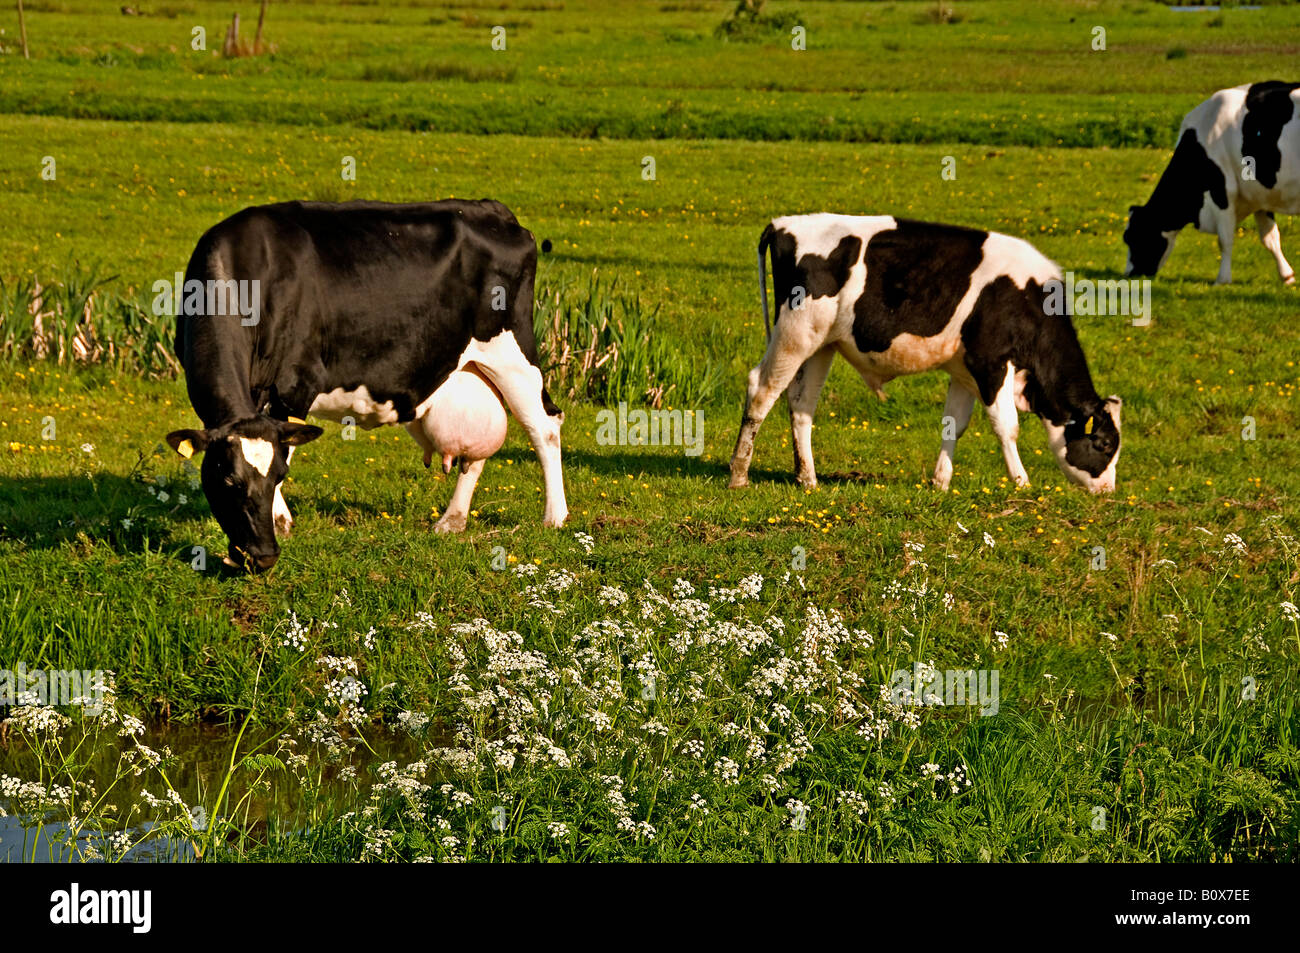 North South Holland Cow Netherlands dutch farming farmer agriculture Stock Photo